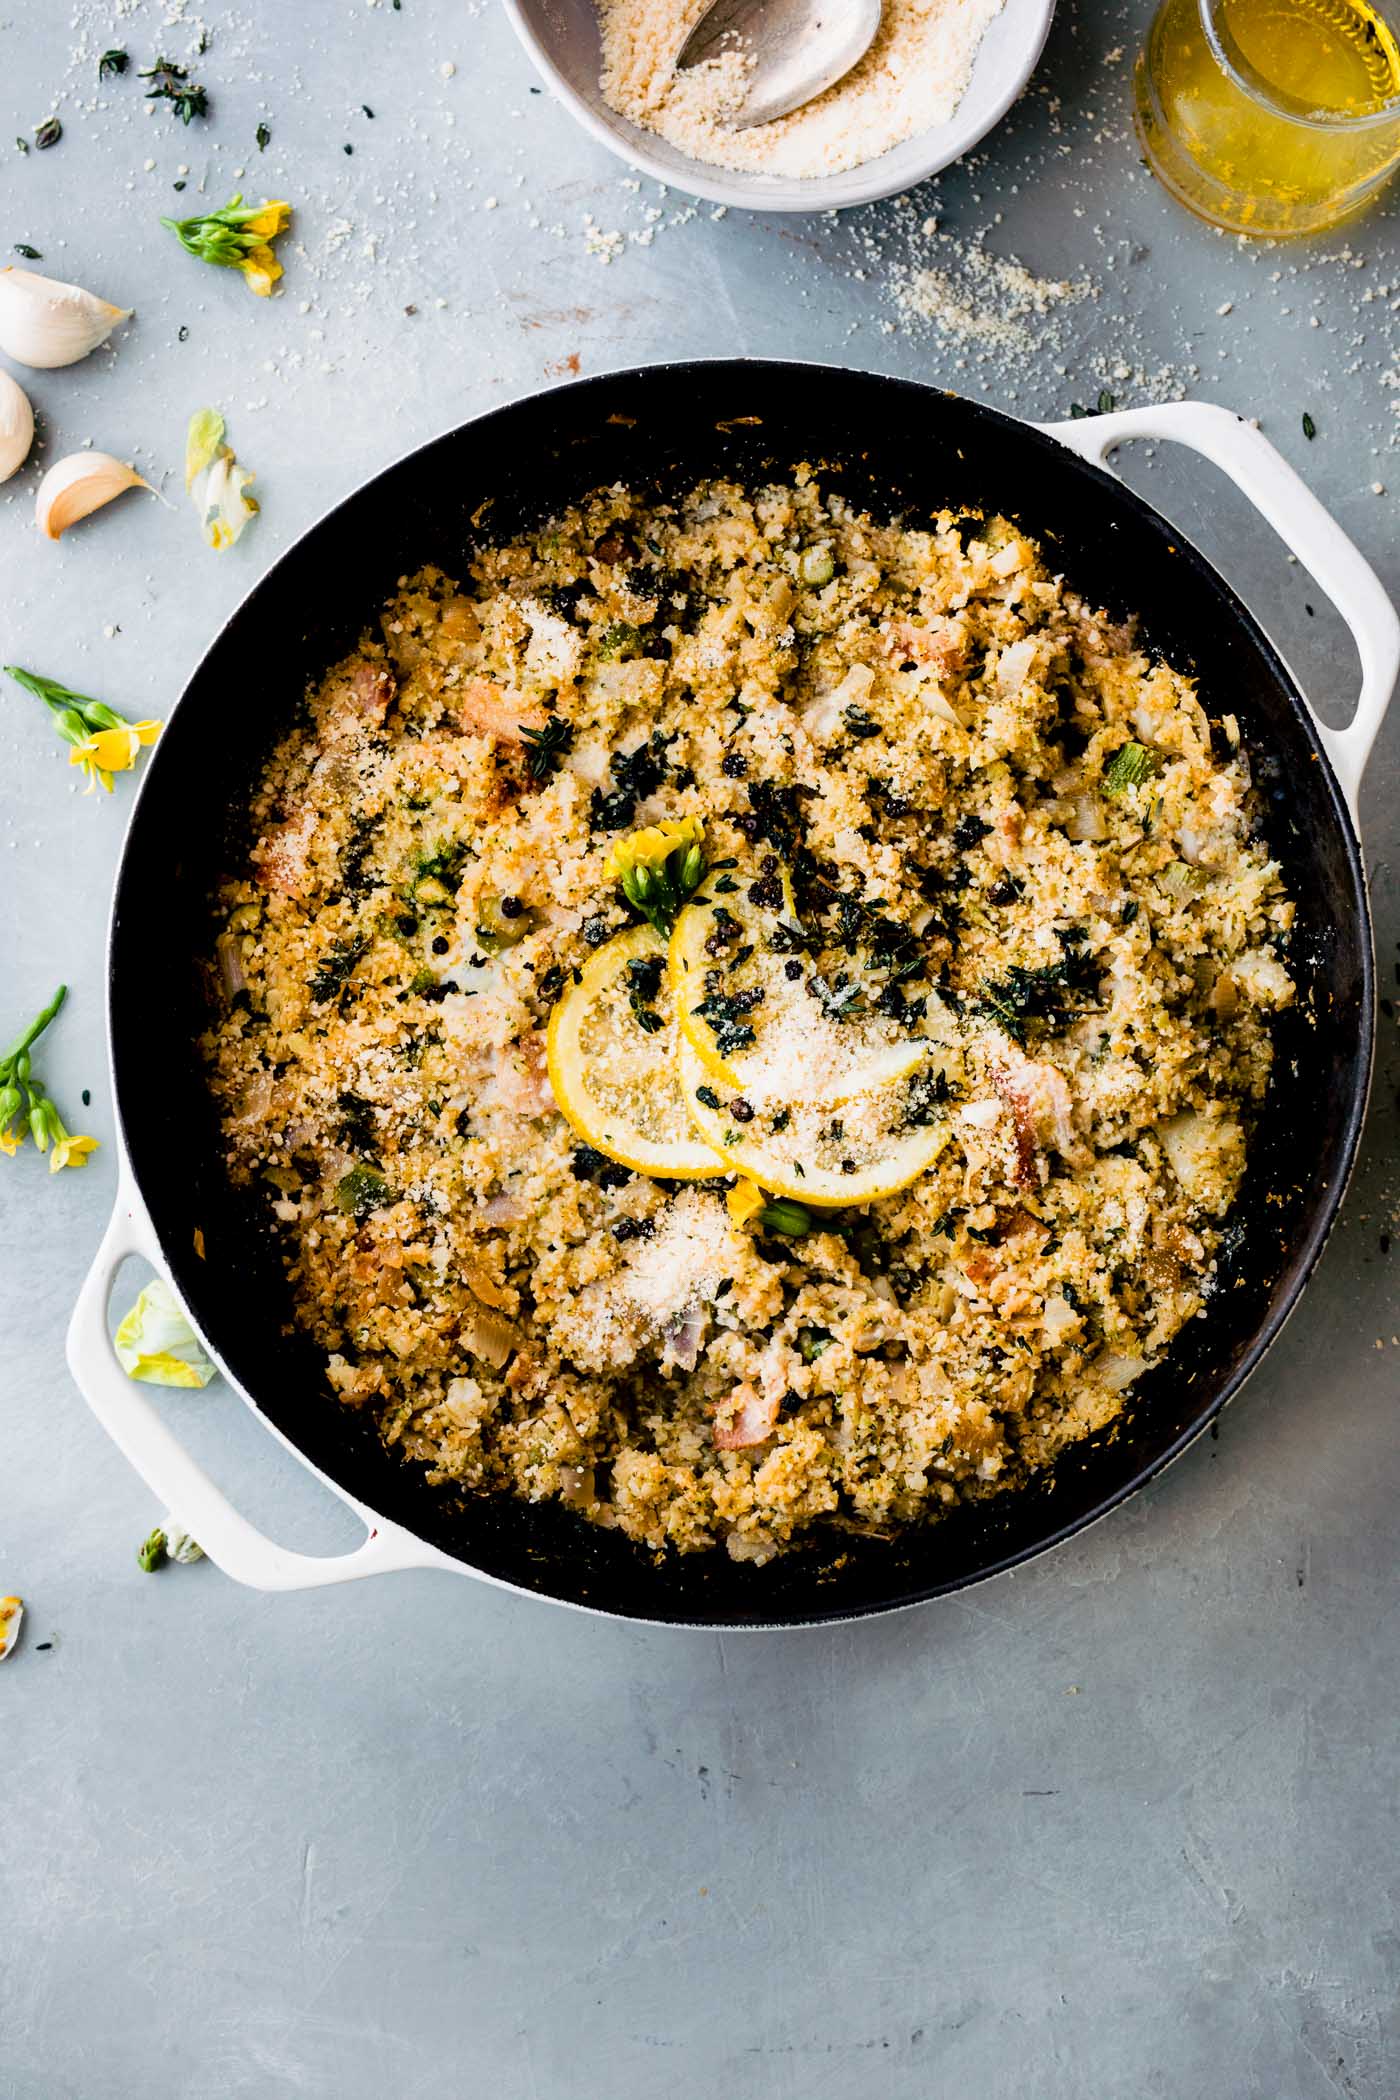 skillet of healthy cauliflower rice and riced broccoli casserole